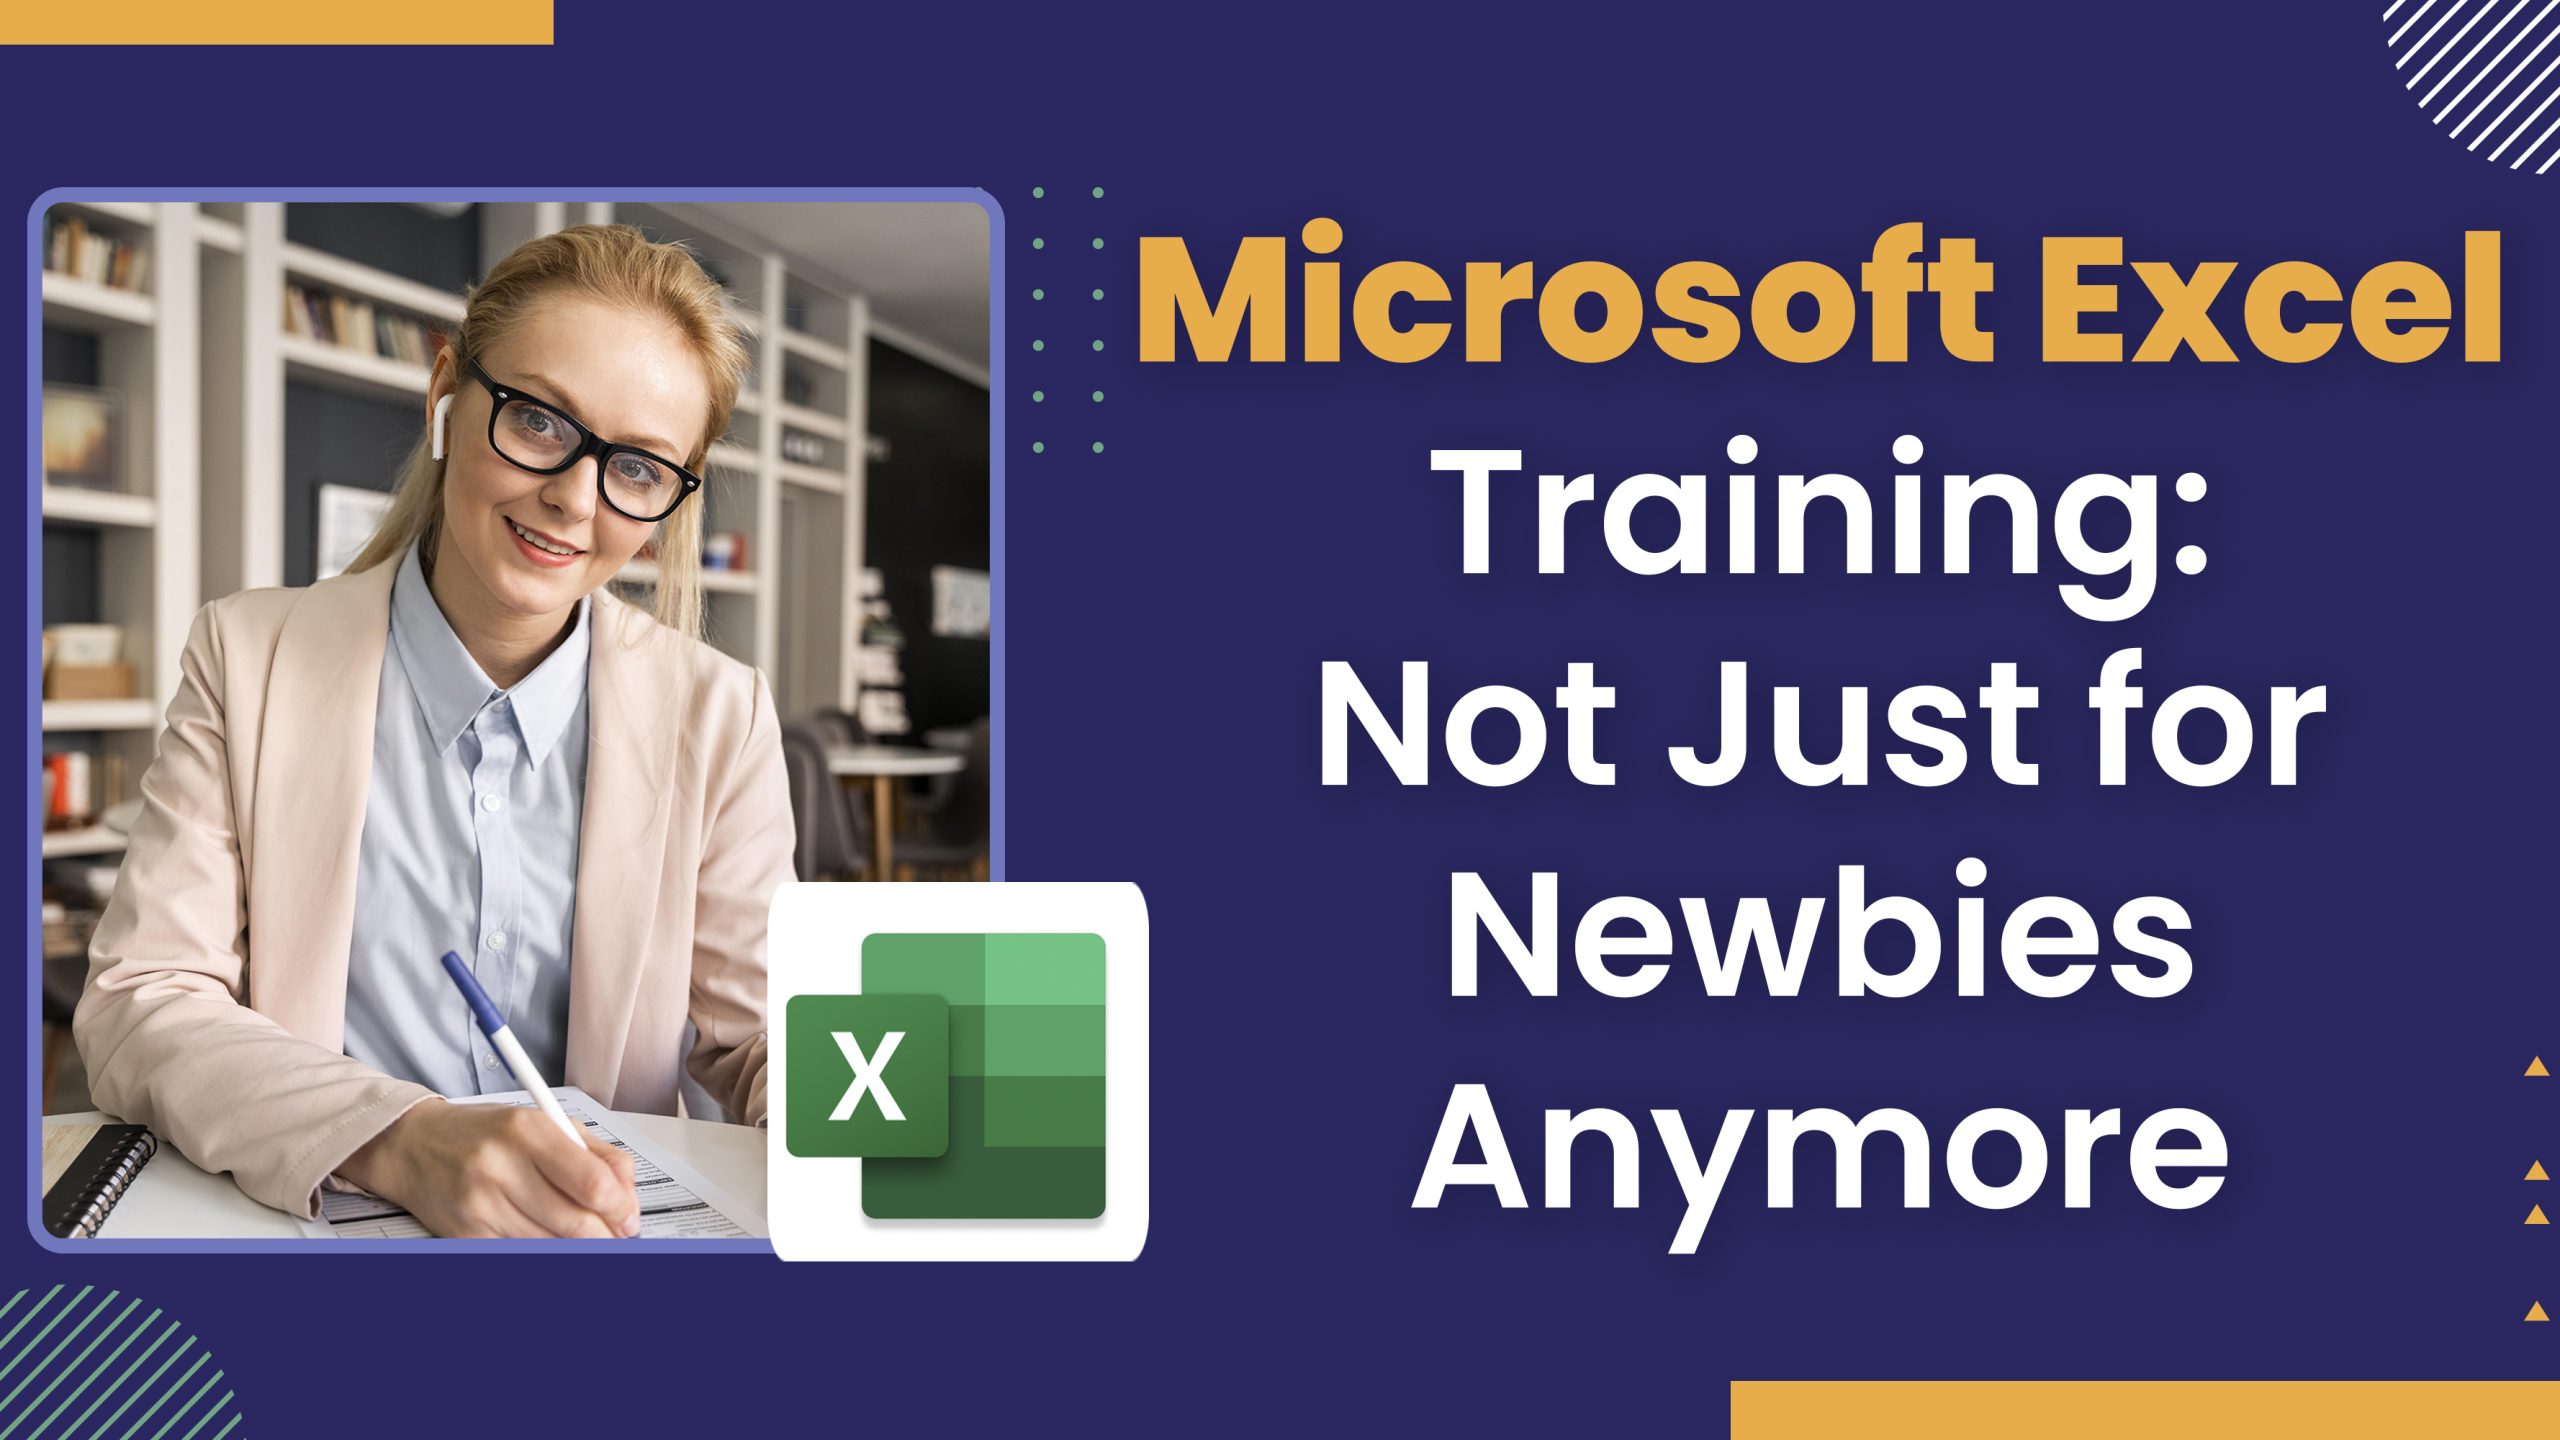 Microsoft Excel Training Not Just for Newbies Anymore